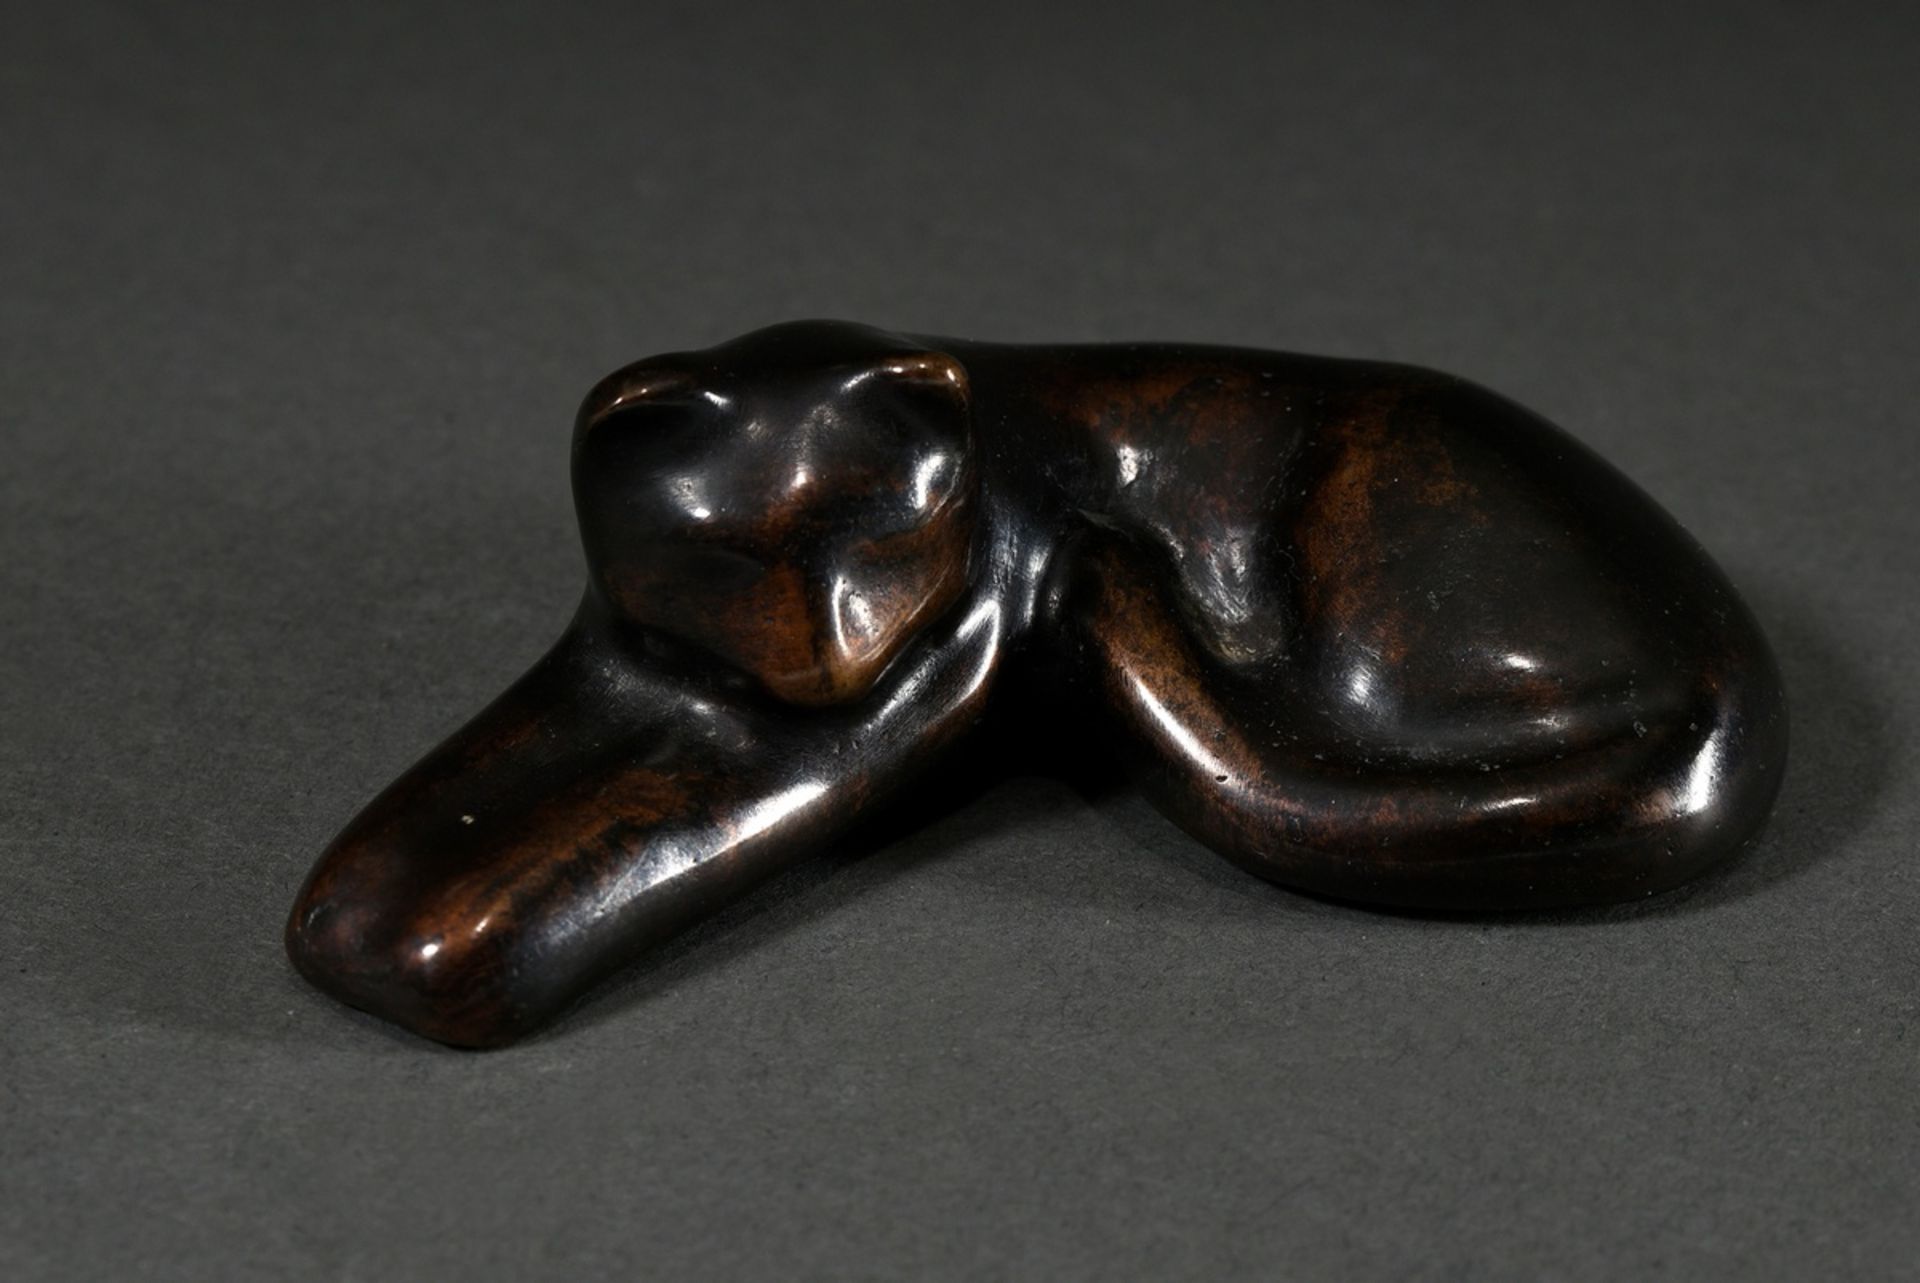 Maetzel, Monika (1917-2010) figure " Lying cat", bronze partly patinated, in the bottom monogr./dat